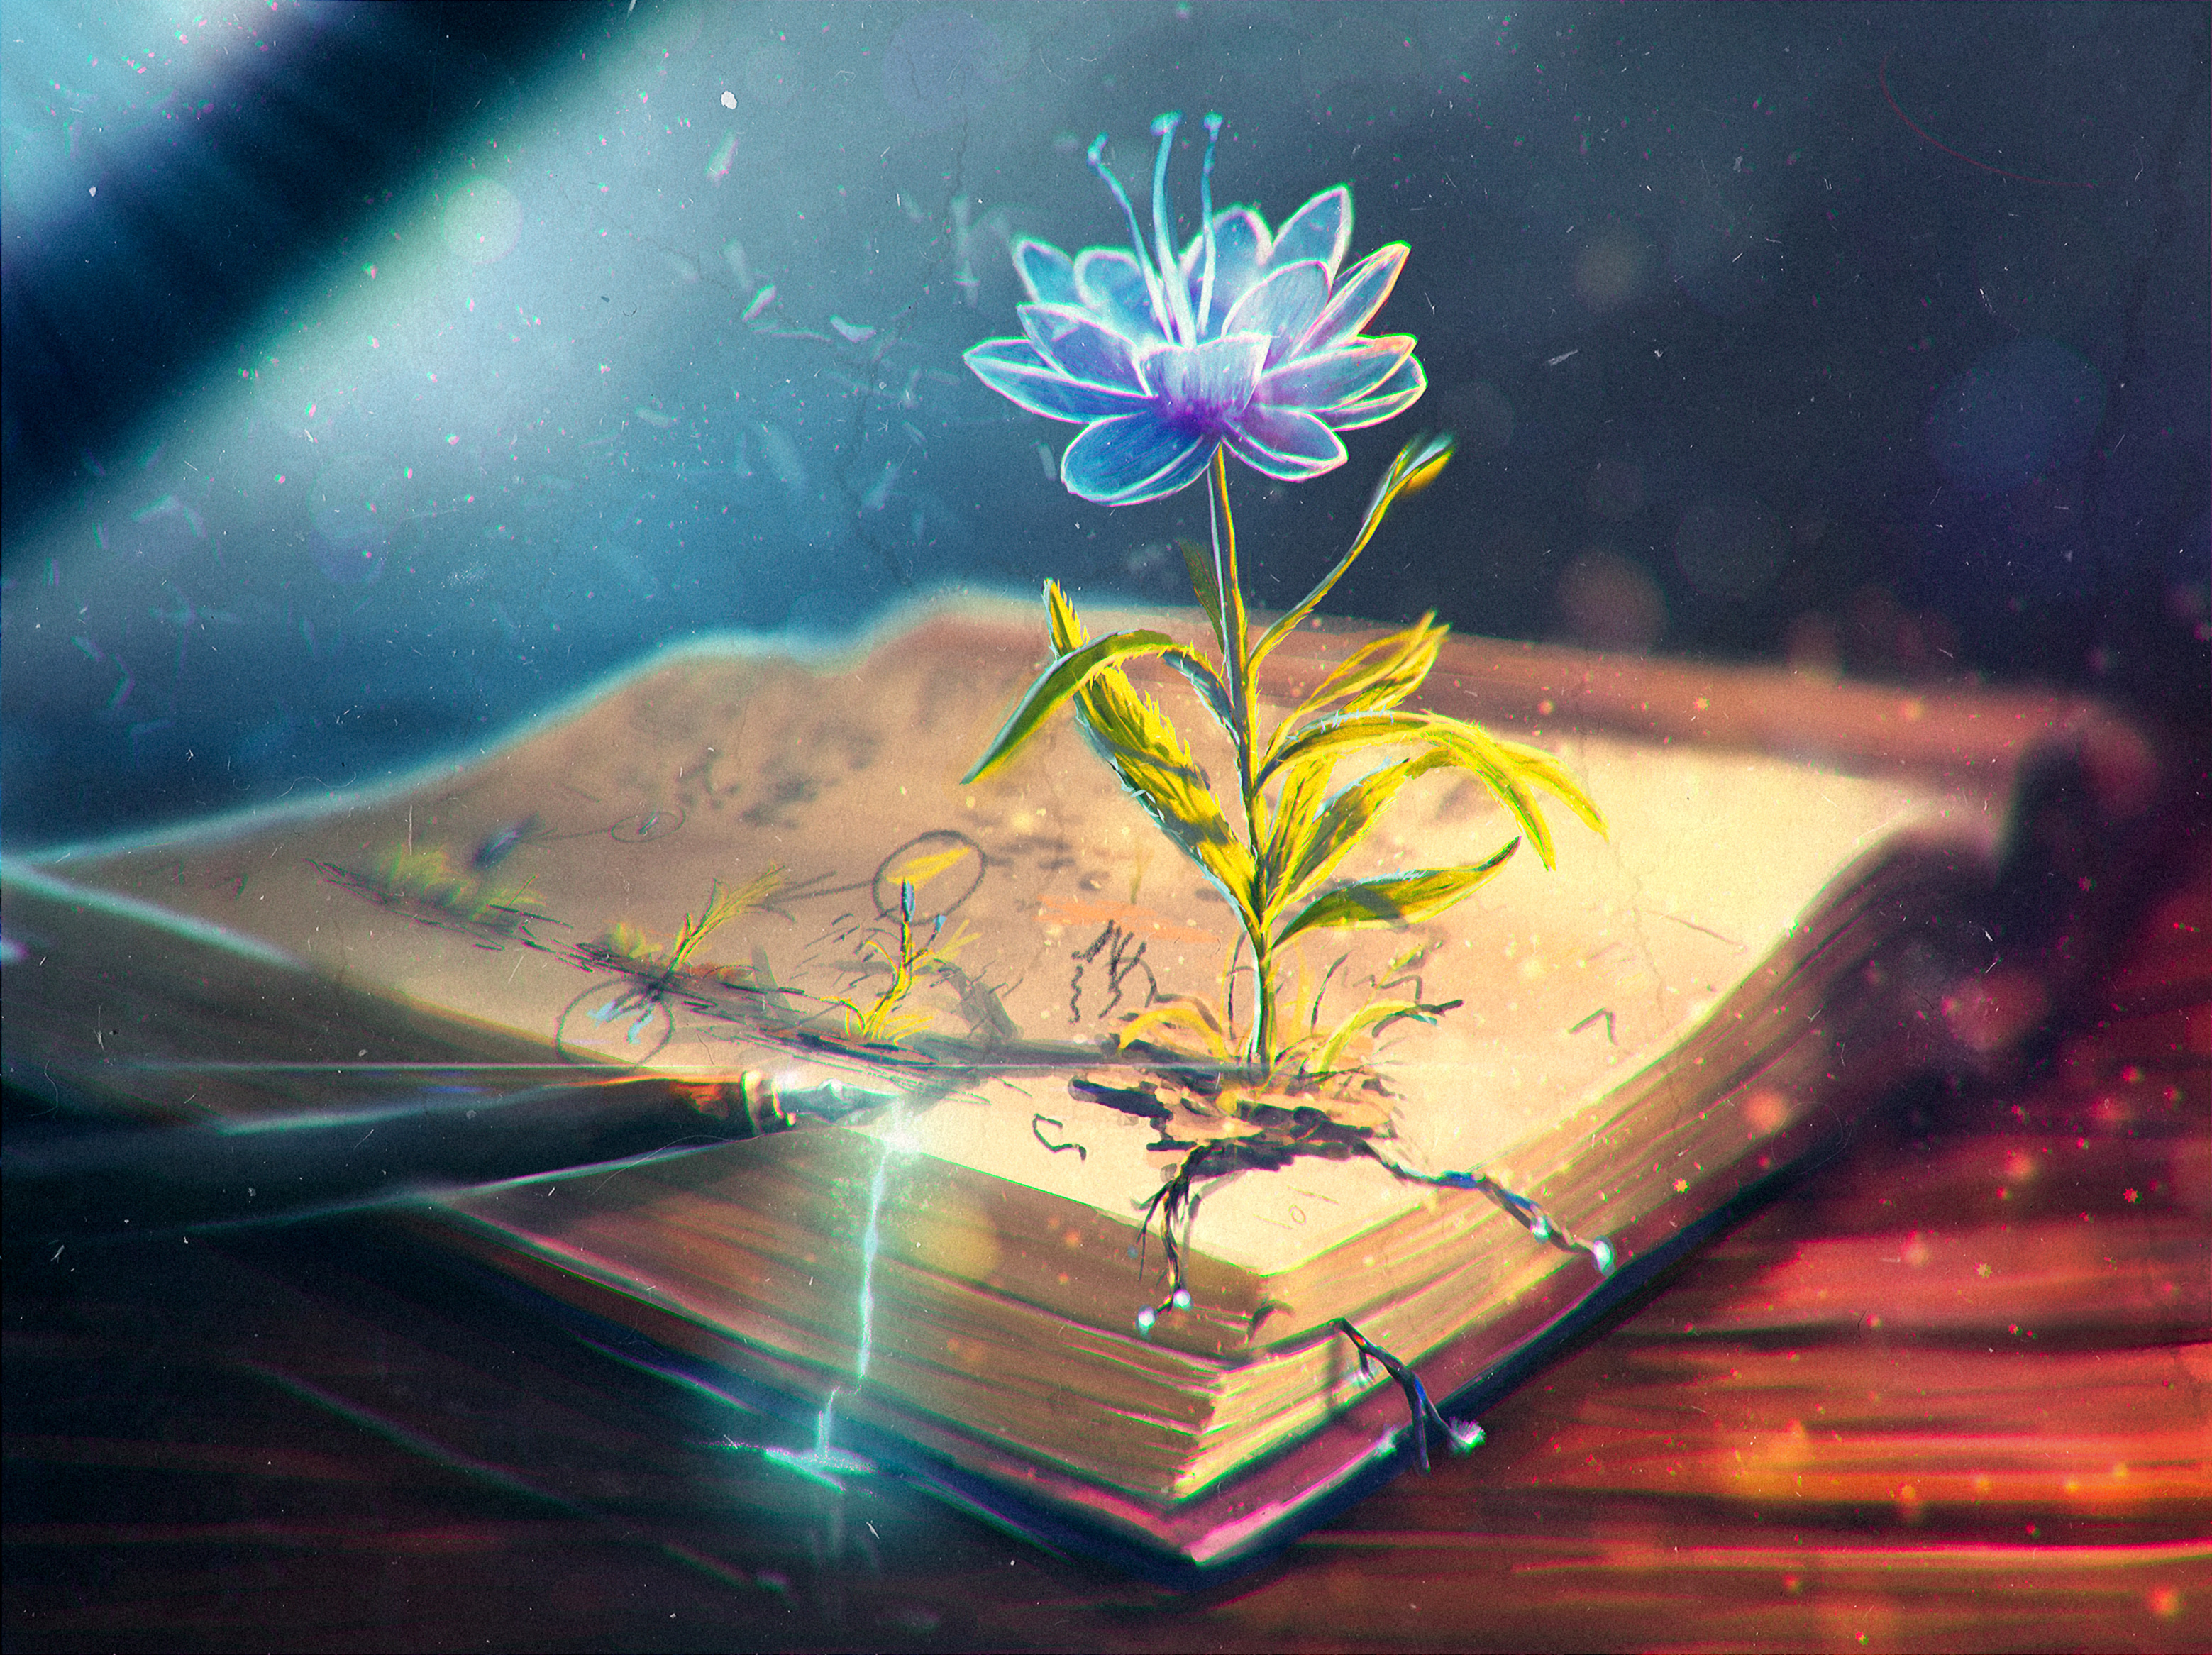 pen, flower, abstract, book, feather iphone wallpaper